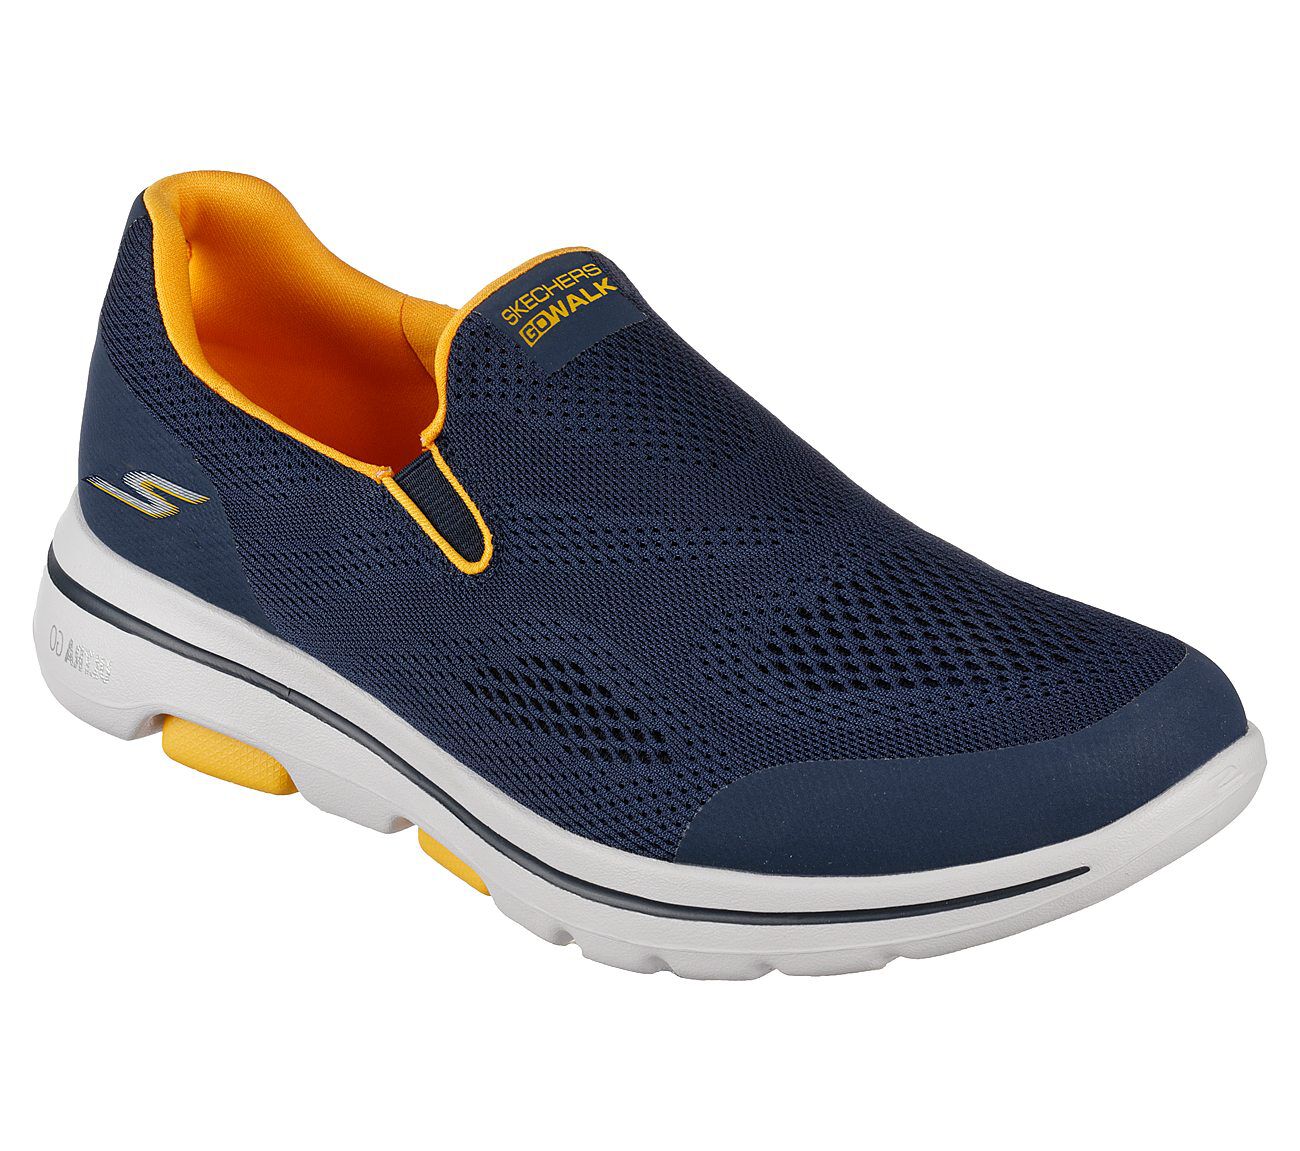 Skechers ARCH FIT - CHARGE BA Walking Shoes For Men - Buy Skechers ARCH FIT  - CHARGE BA Walking Shoes For Men Online at Best Price - Shop Online for  Footwears in India | Flipkart.com